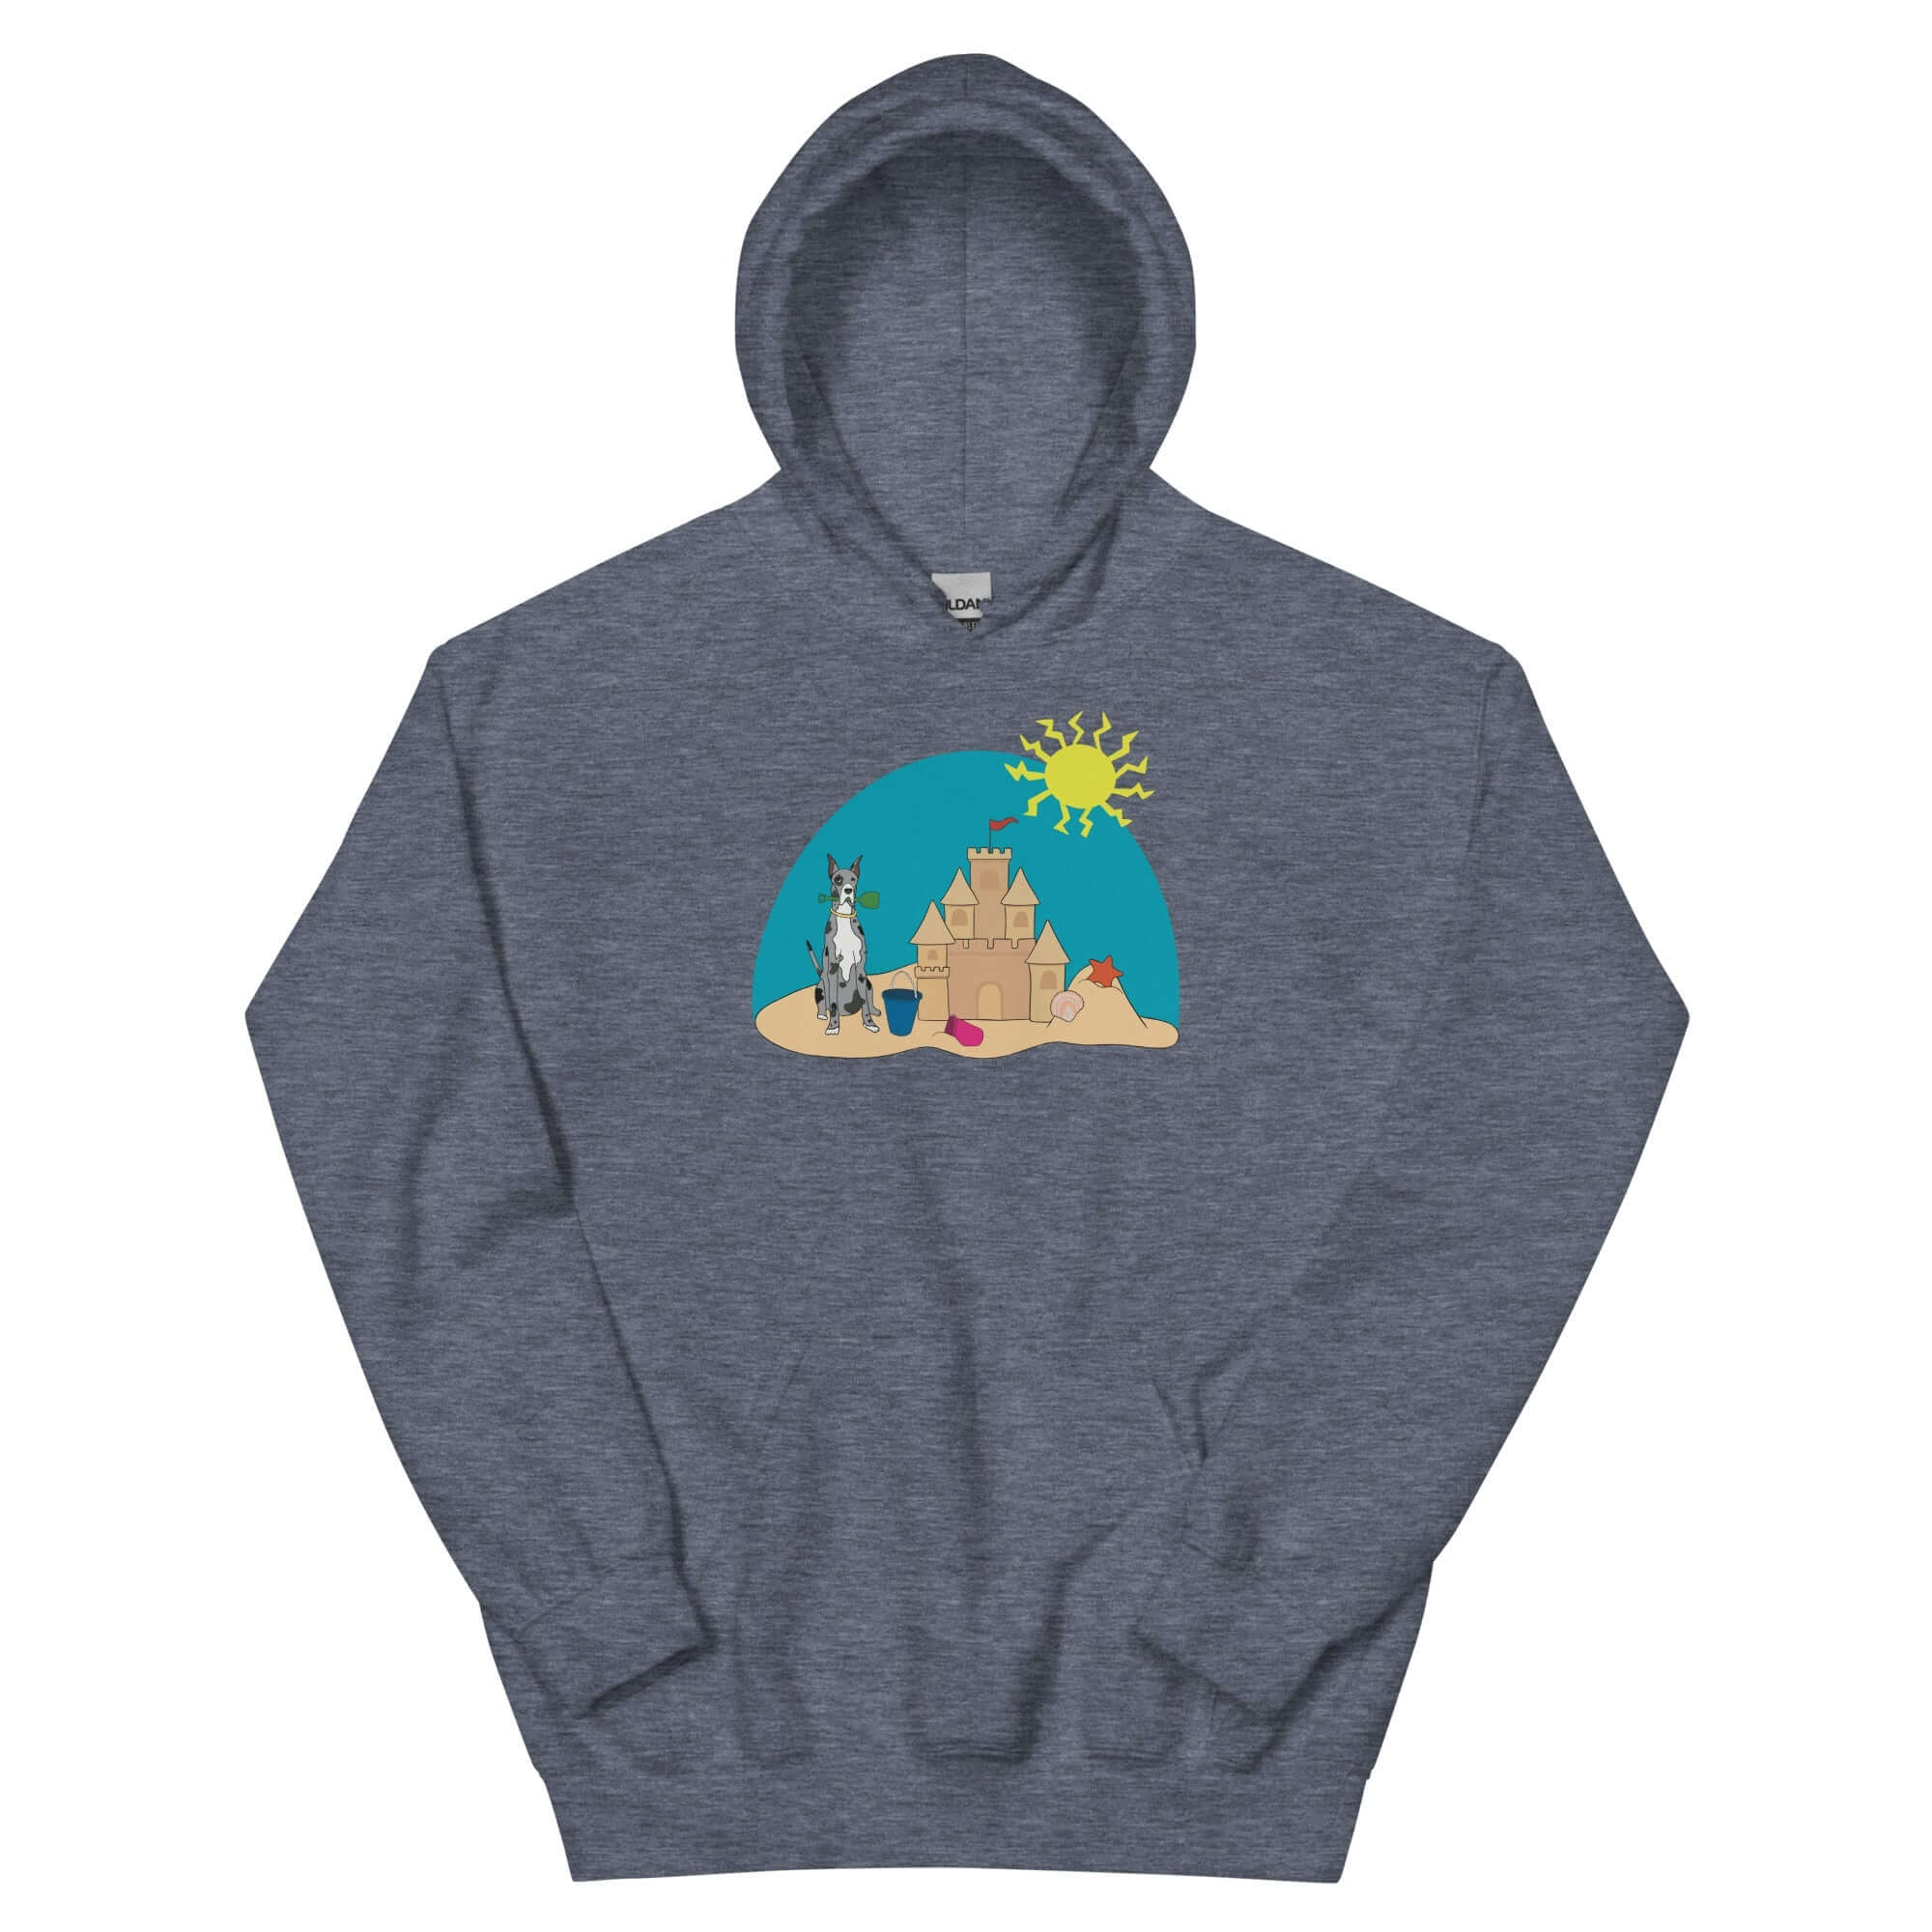 Building a Sand Castle Hoodie - TAILWAGS UNLIMITED